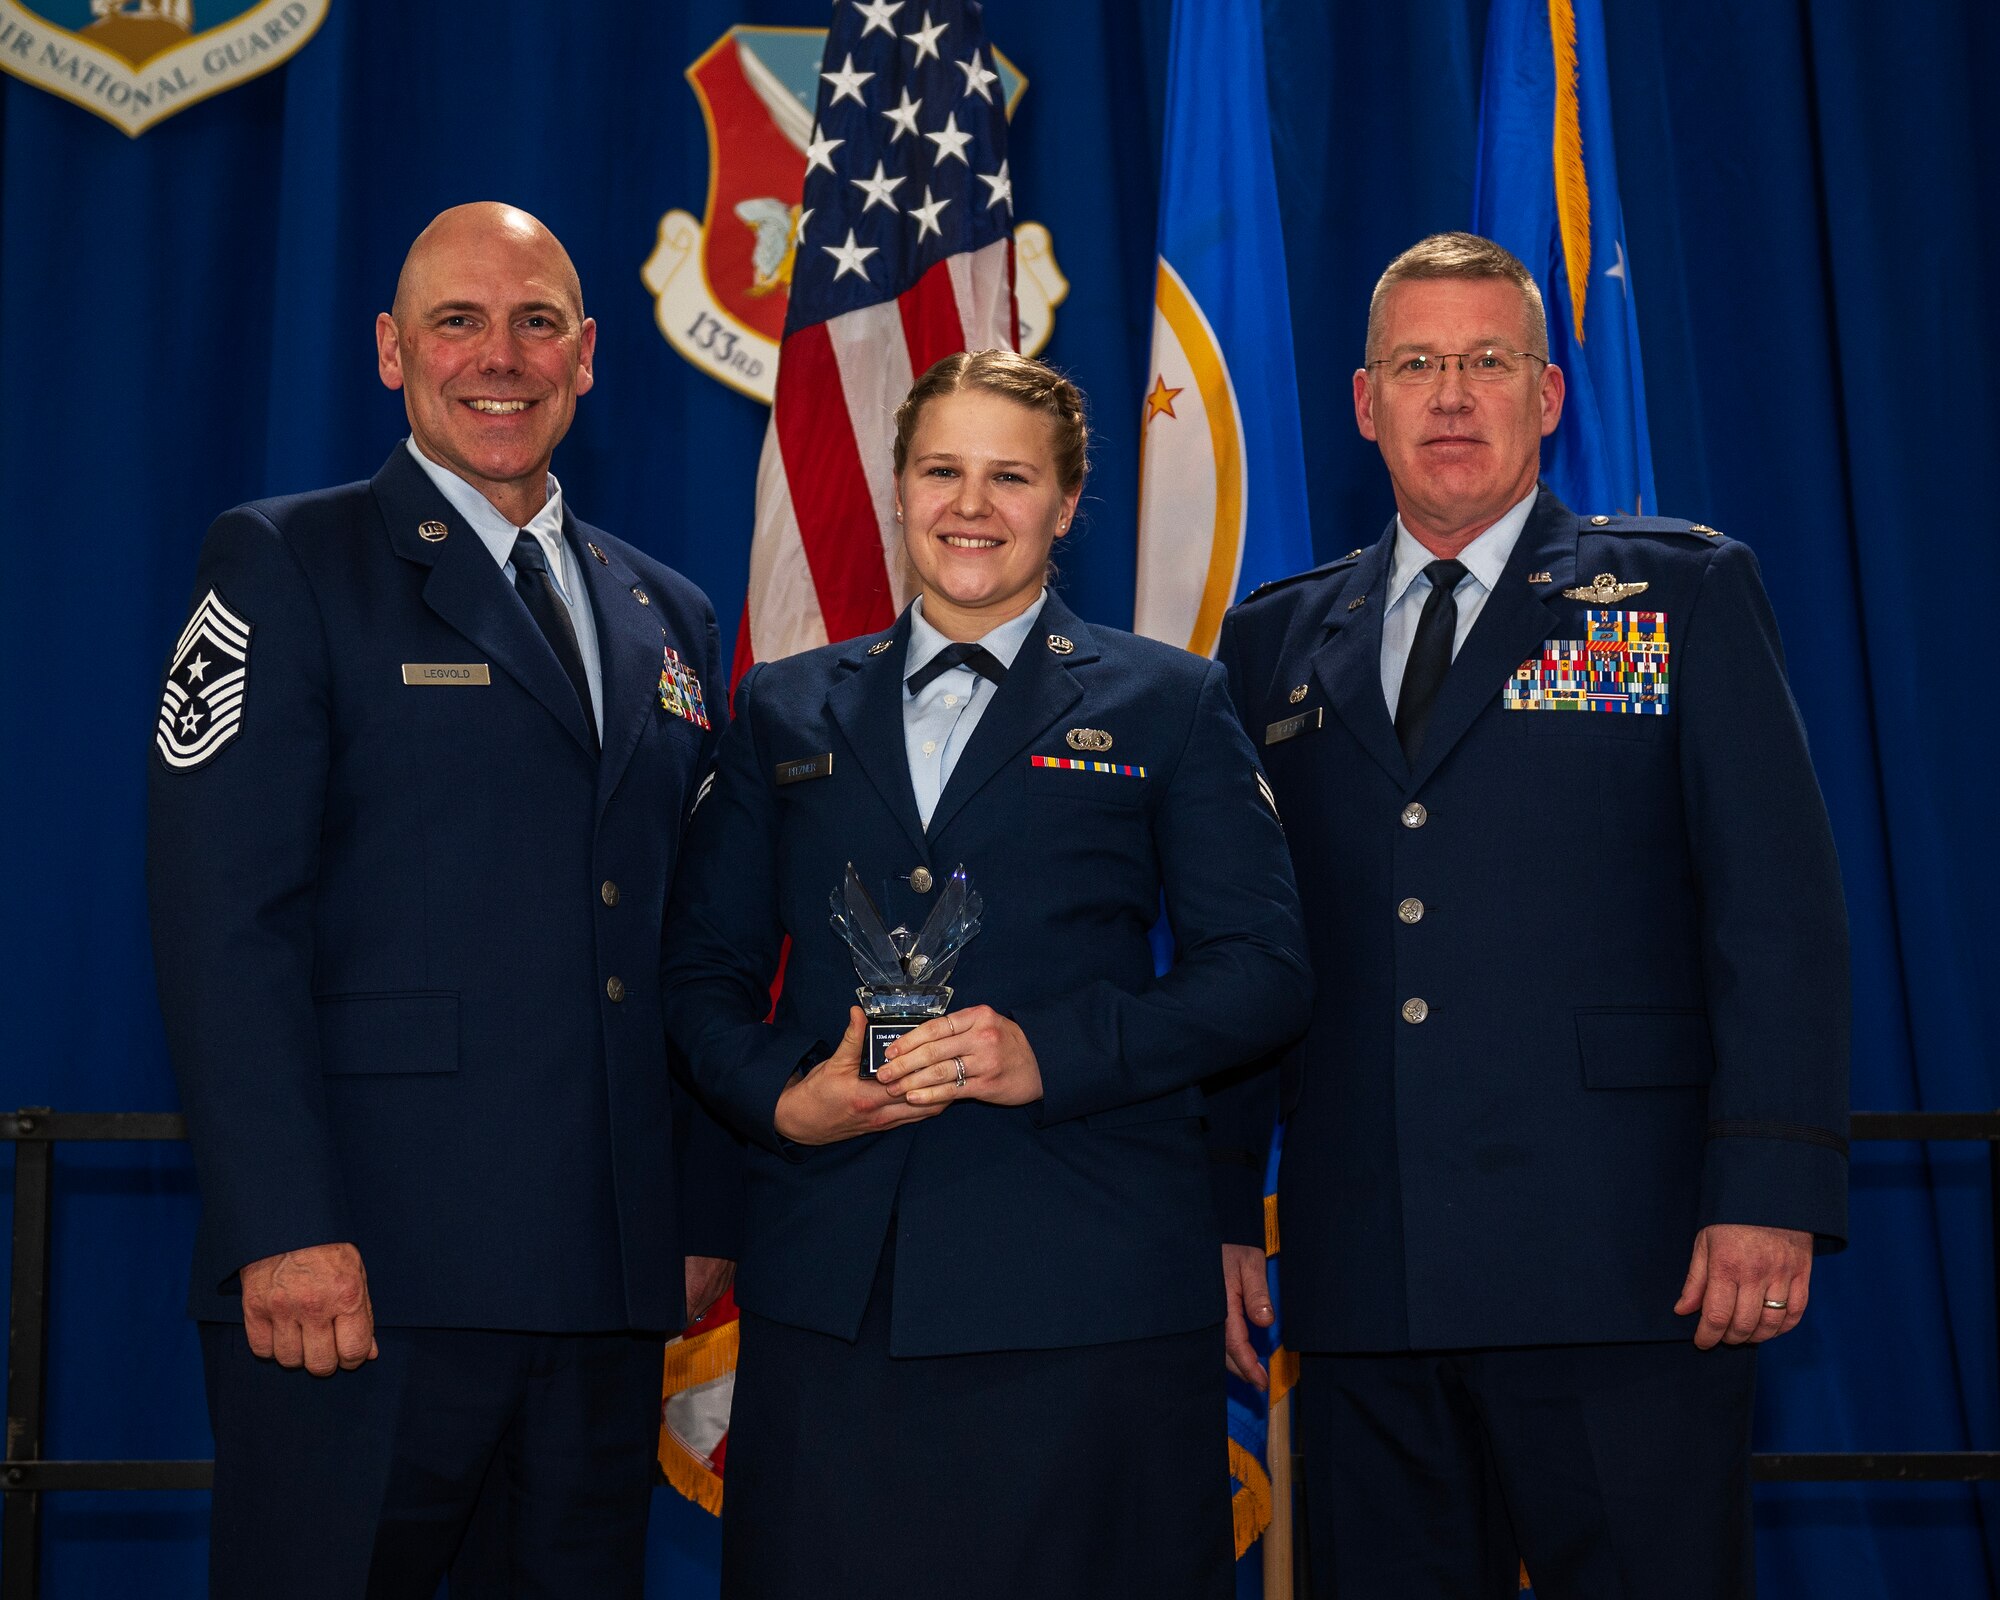 U.S. Air Force Airman 1st Class Mindy Pitzner, 133rd Comptroller Flight, receives the 2022 Junior Enlisted Airman of the Year award in St. Paul, Minn., Dec. 11, 2022.